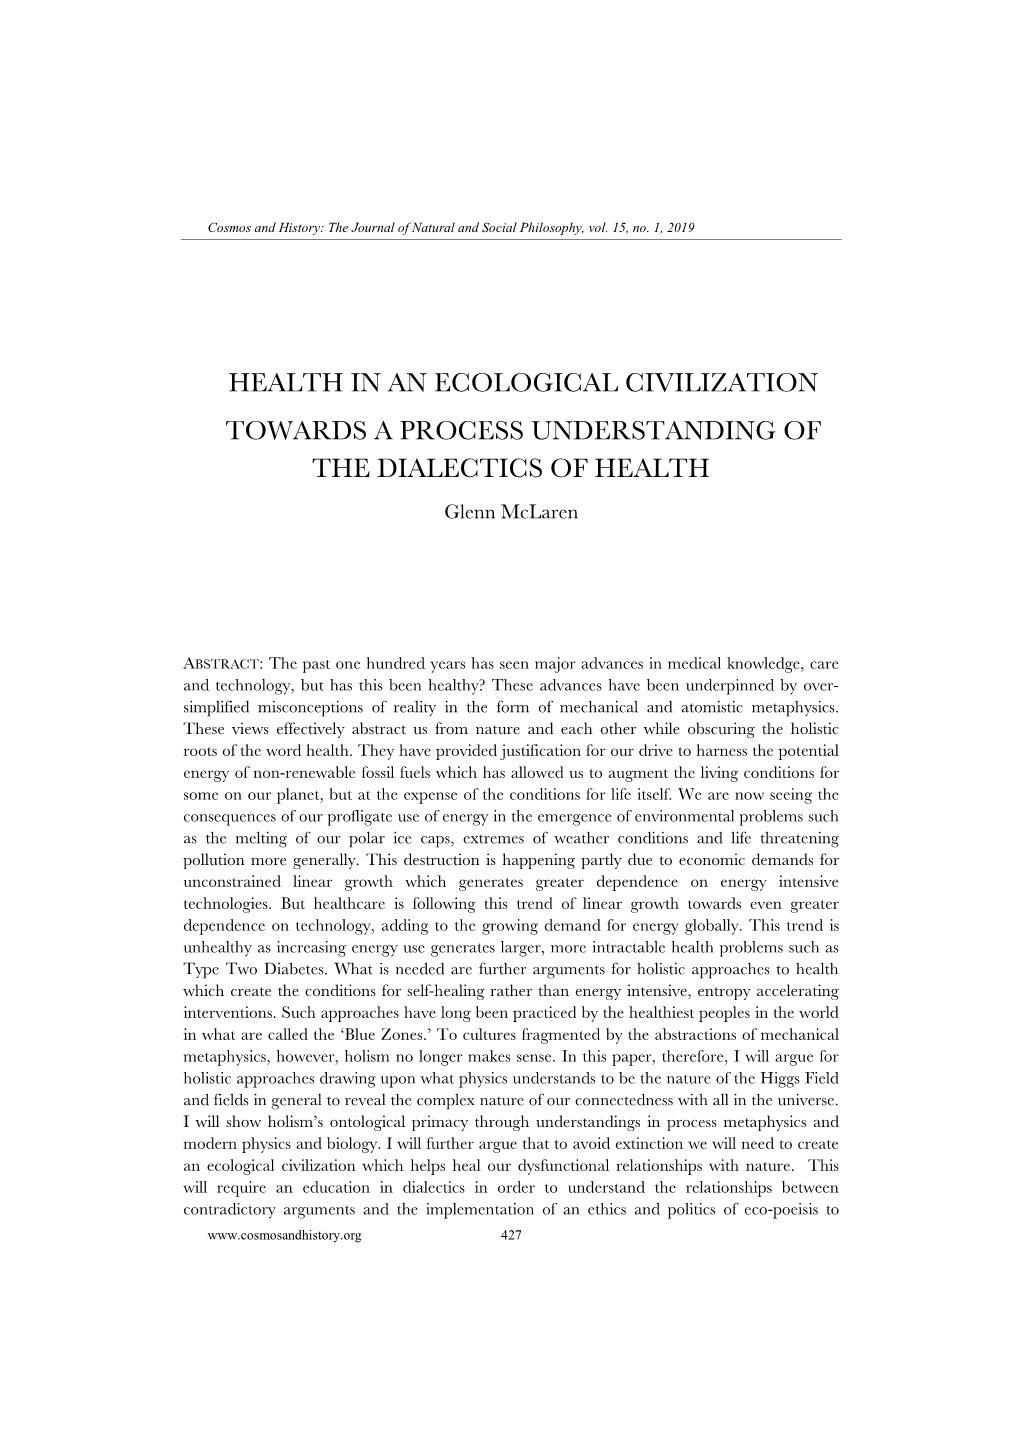 HEALTH in an ECOLOGICAL CIVILIZATION TOWARDS a PROCESS UNDERSTANDING of the DIALECTICS of HEALTH Glenn Mclaren